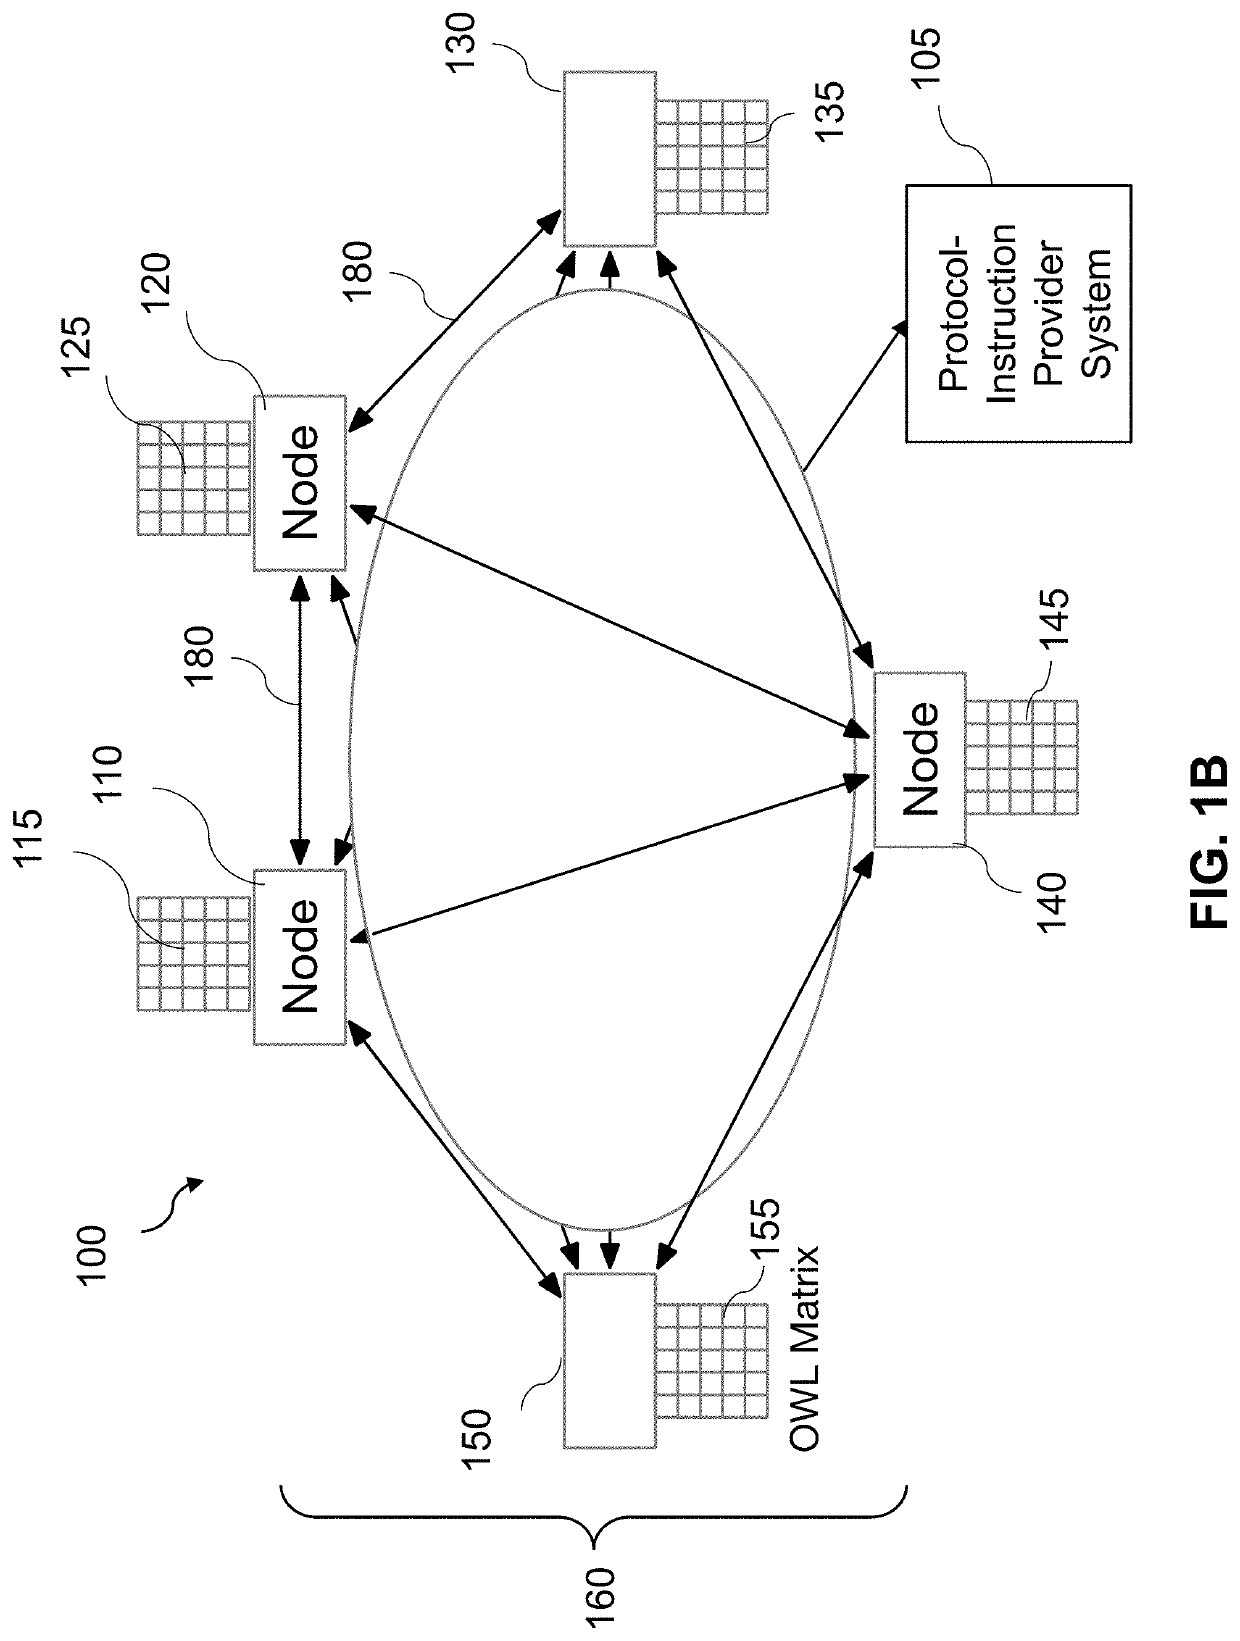 System and method for autonomous selection of routing paths in a computer network